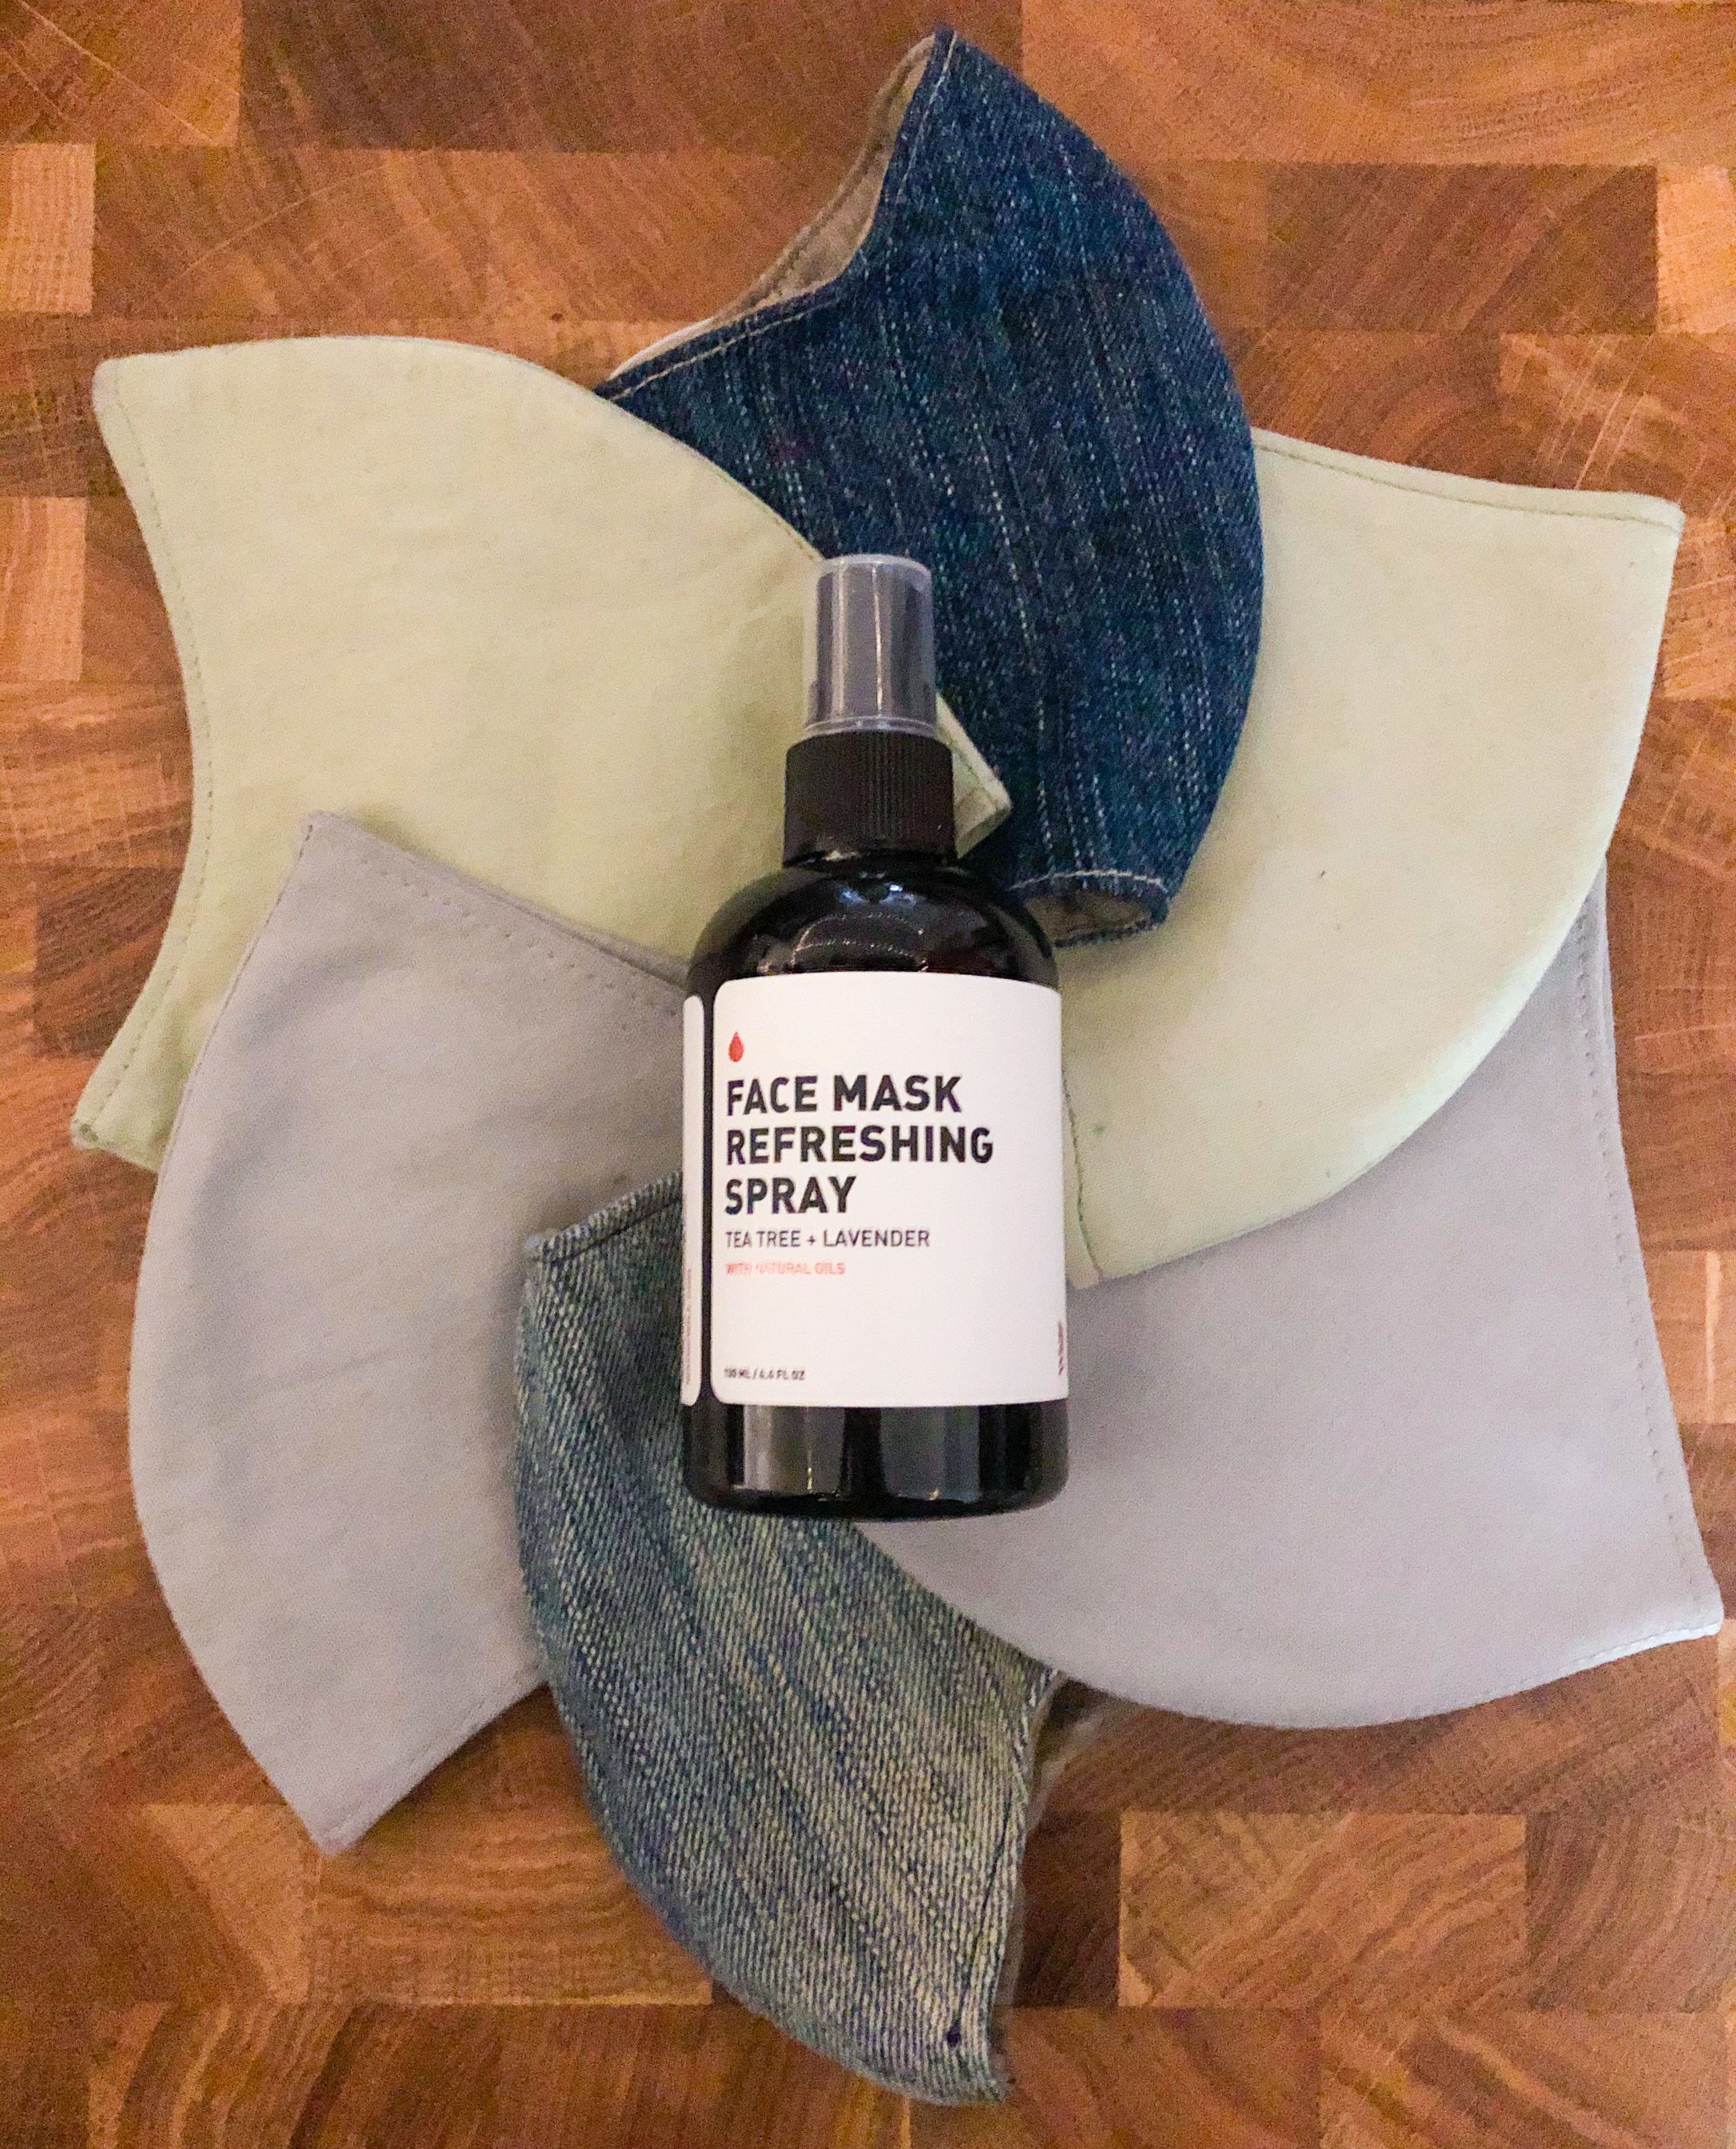 A bottle of face mask refreshing spray resting on top of several cloth face masks